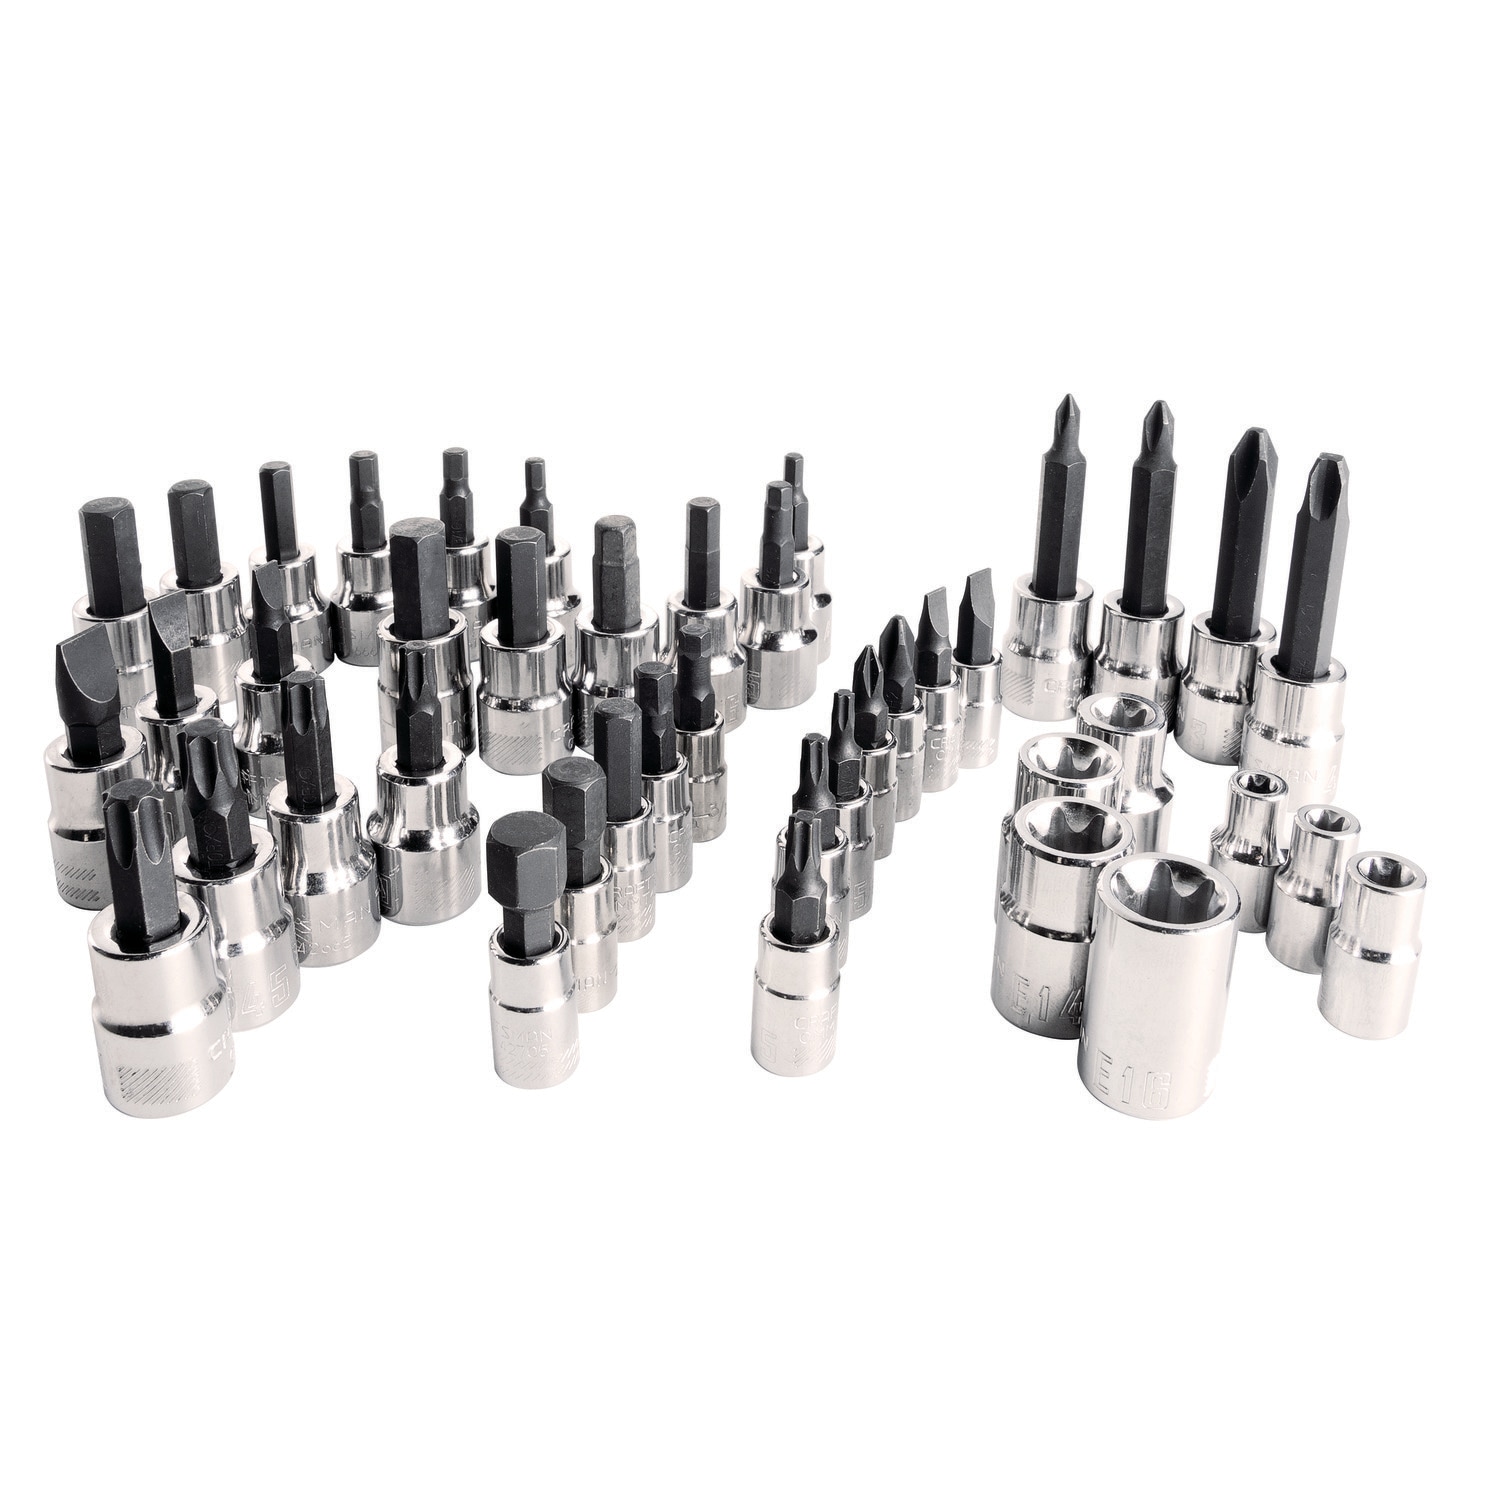 Extension & Adapter Includes 90T Quick-release Ratchet DURATECH 42-piece Bit Socket Ratchet Set with Storage Case 3/8 Drive 1/4 CR-V and S2 Steel Made Torx/Hex/Slotted/Phillips Bit Sockets 